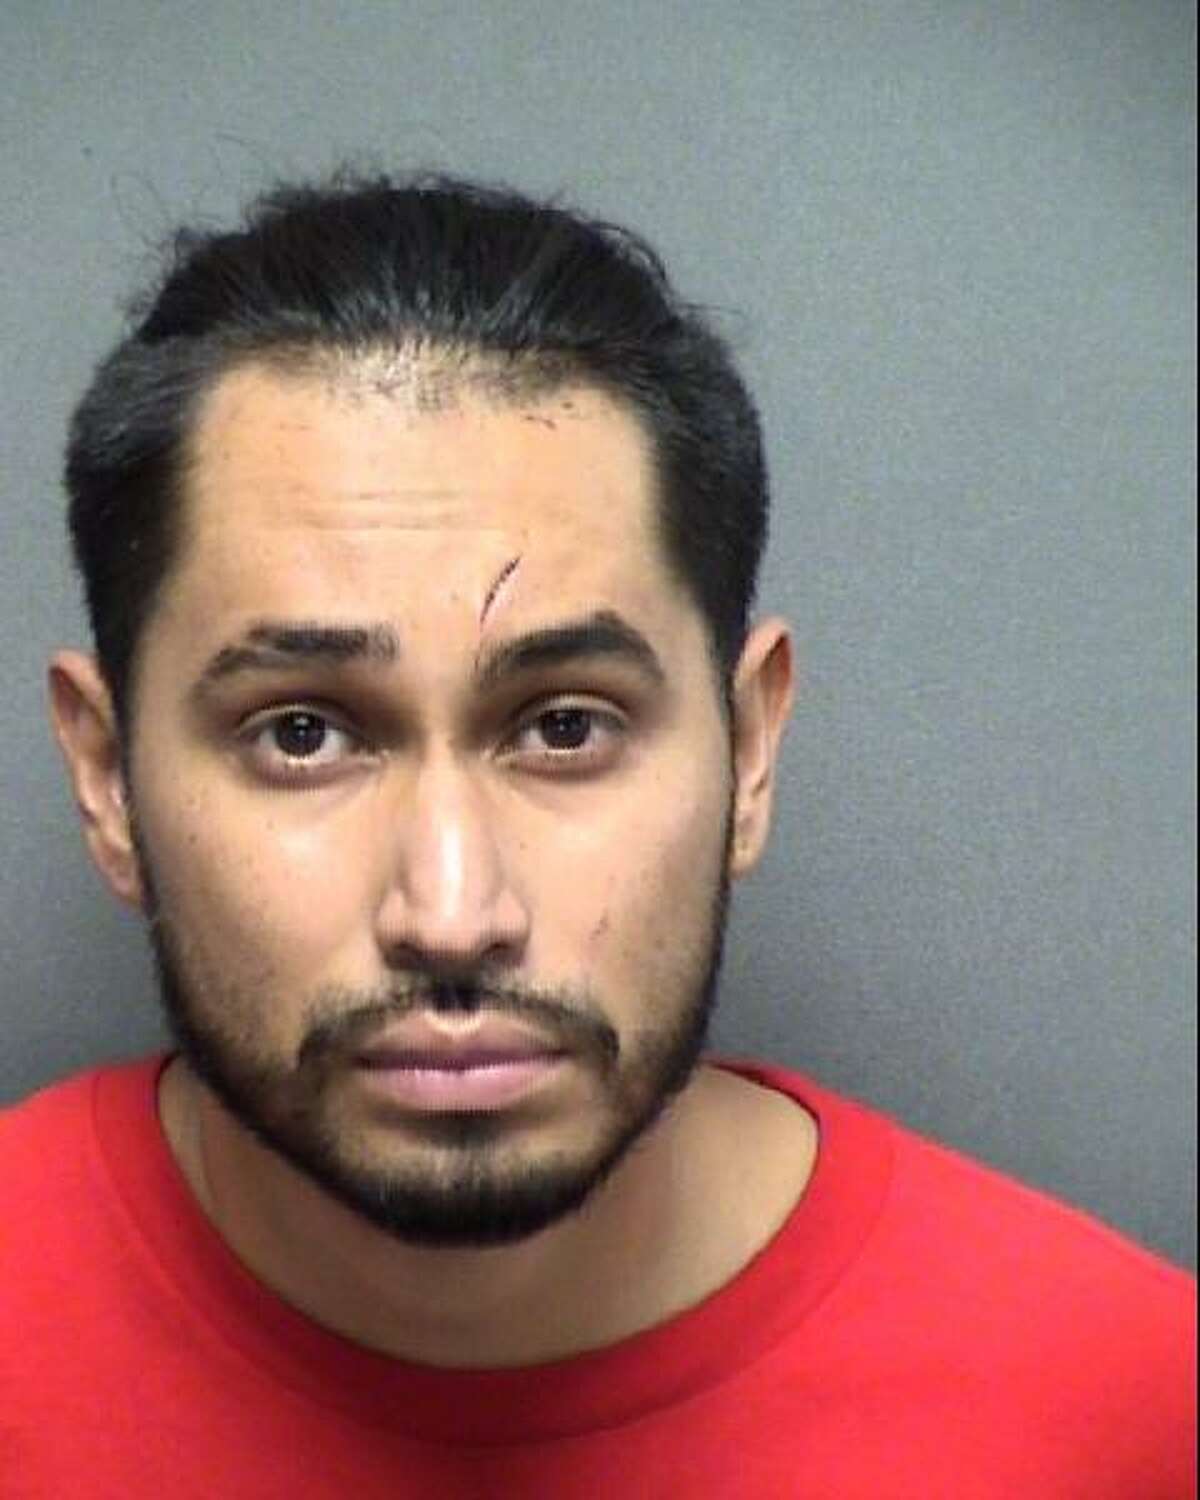 Francisco Javier Garcia Ventura, 29, is charged with tampering with physical evidence. His bail is $200,000.